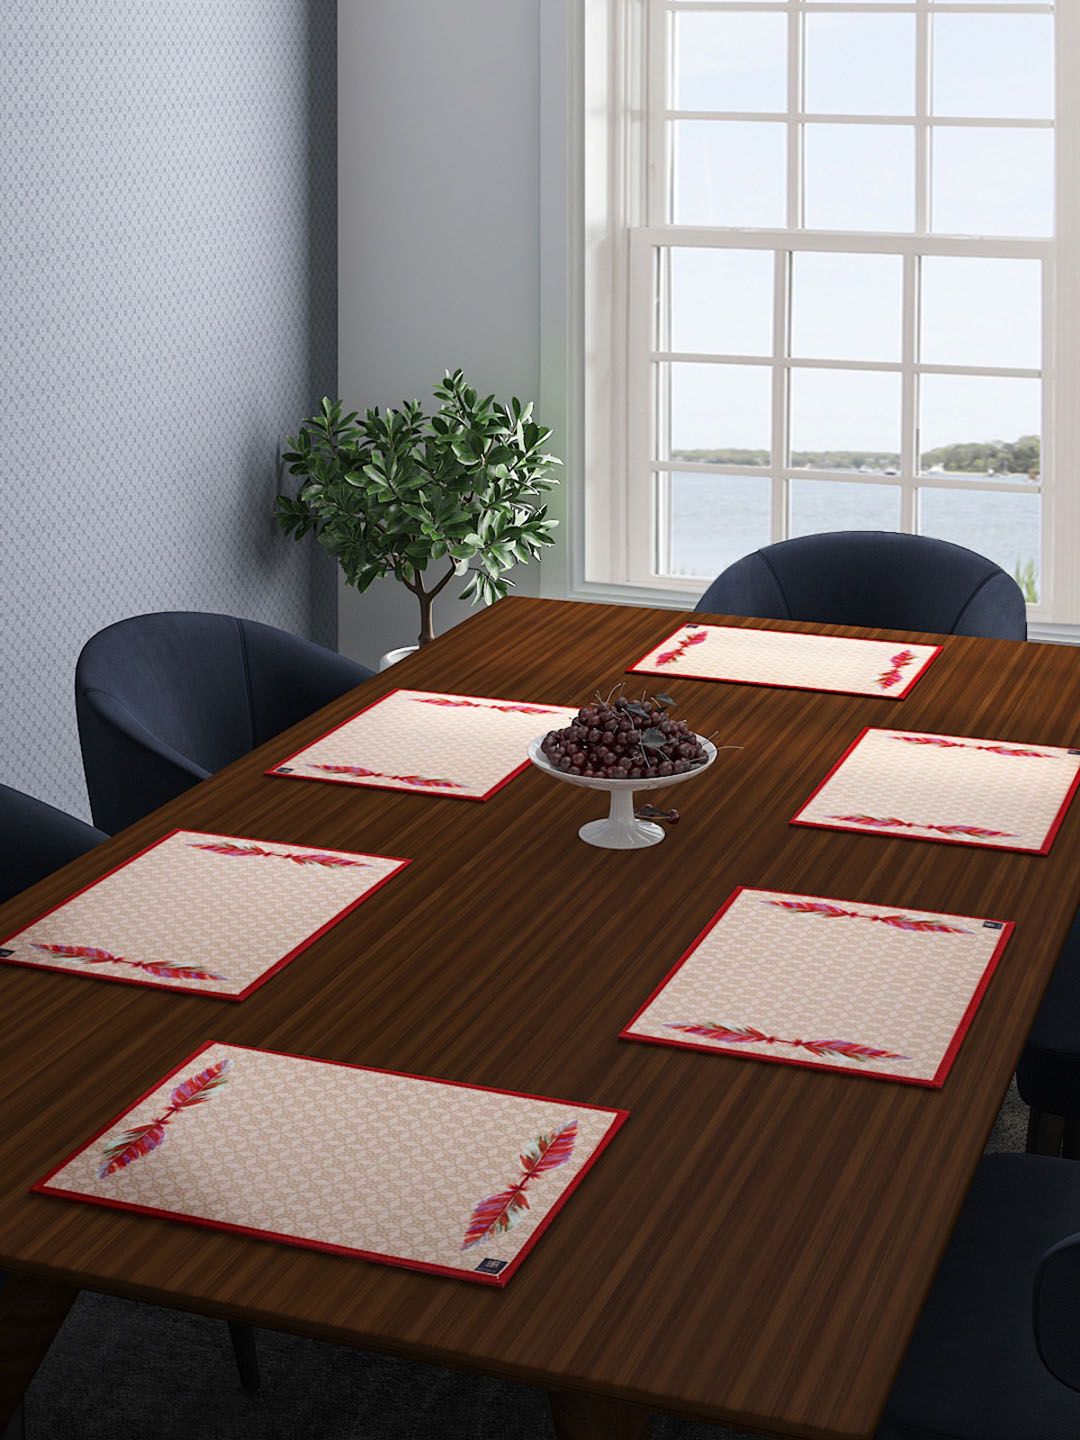 ROMEE Set of 6 Beige & Red Geometric Printed Table Mats Price in India